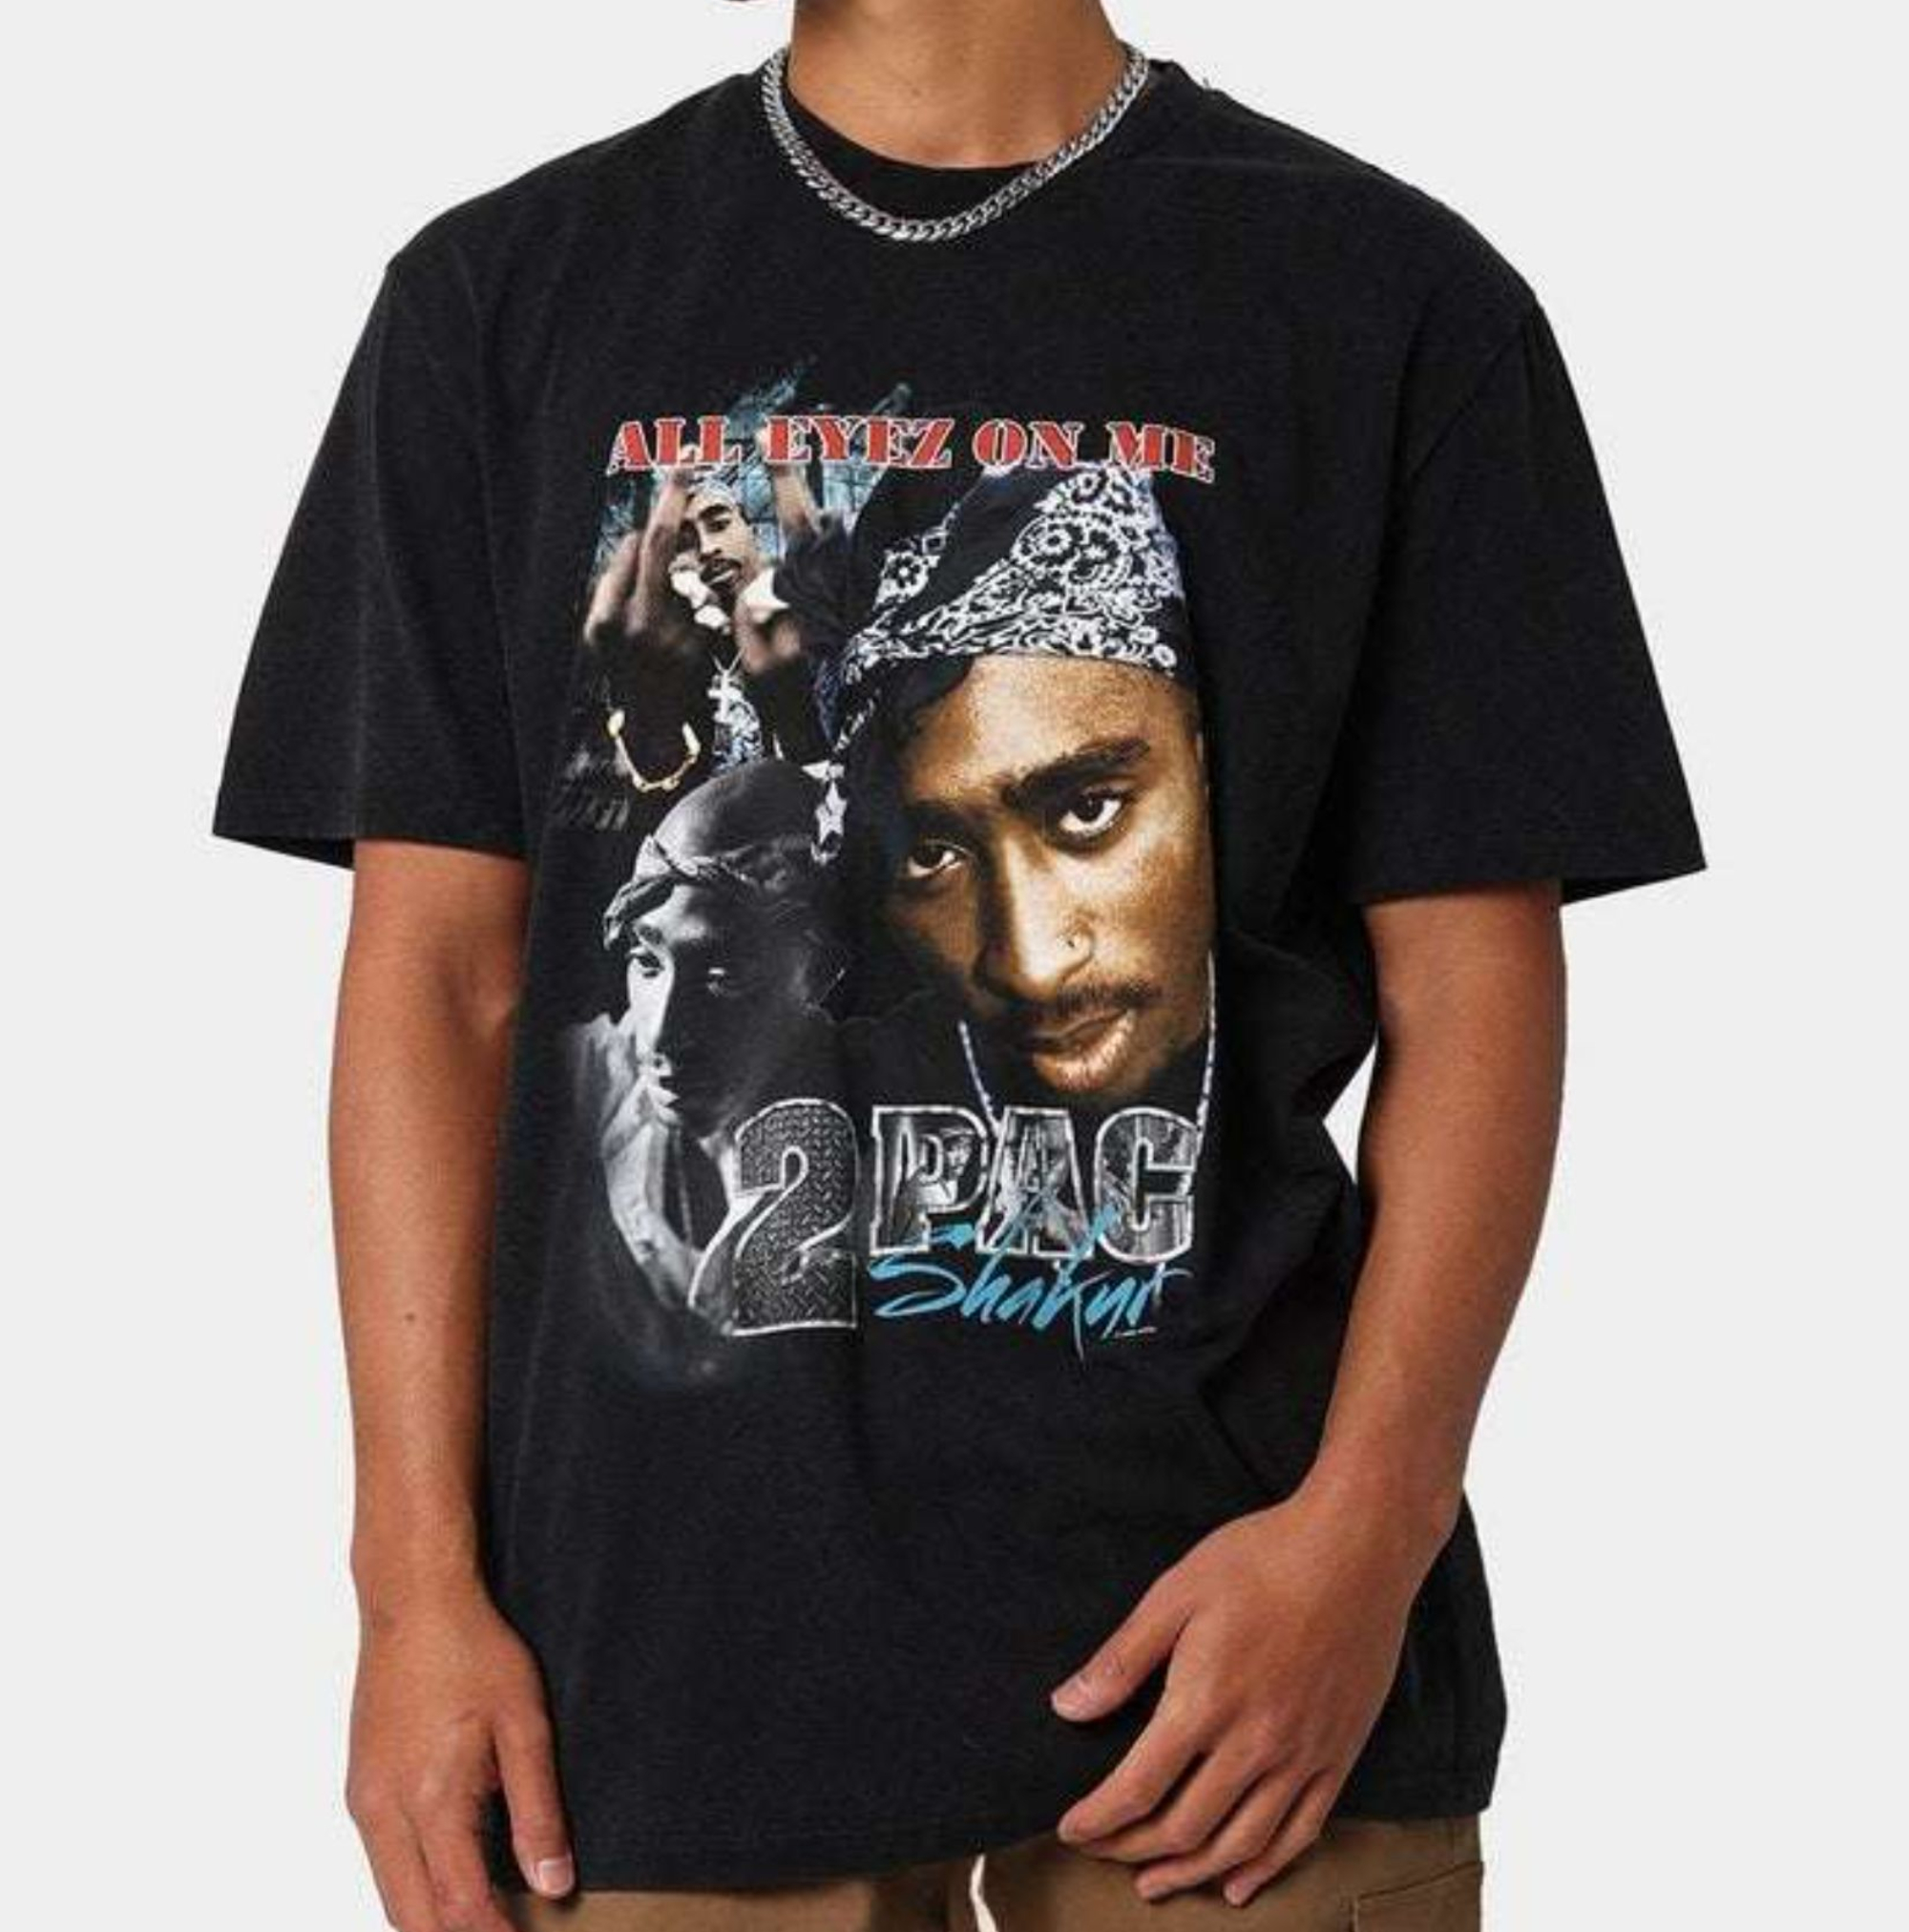 2pac all eyes on me vintage classic unisex t shirt